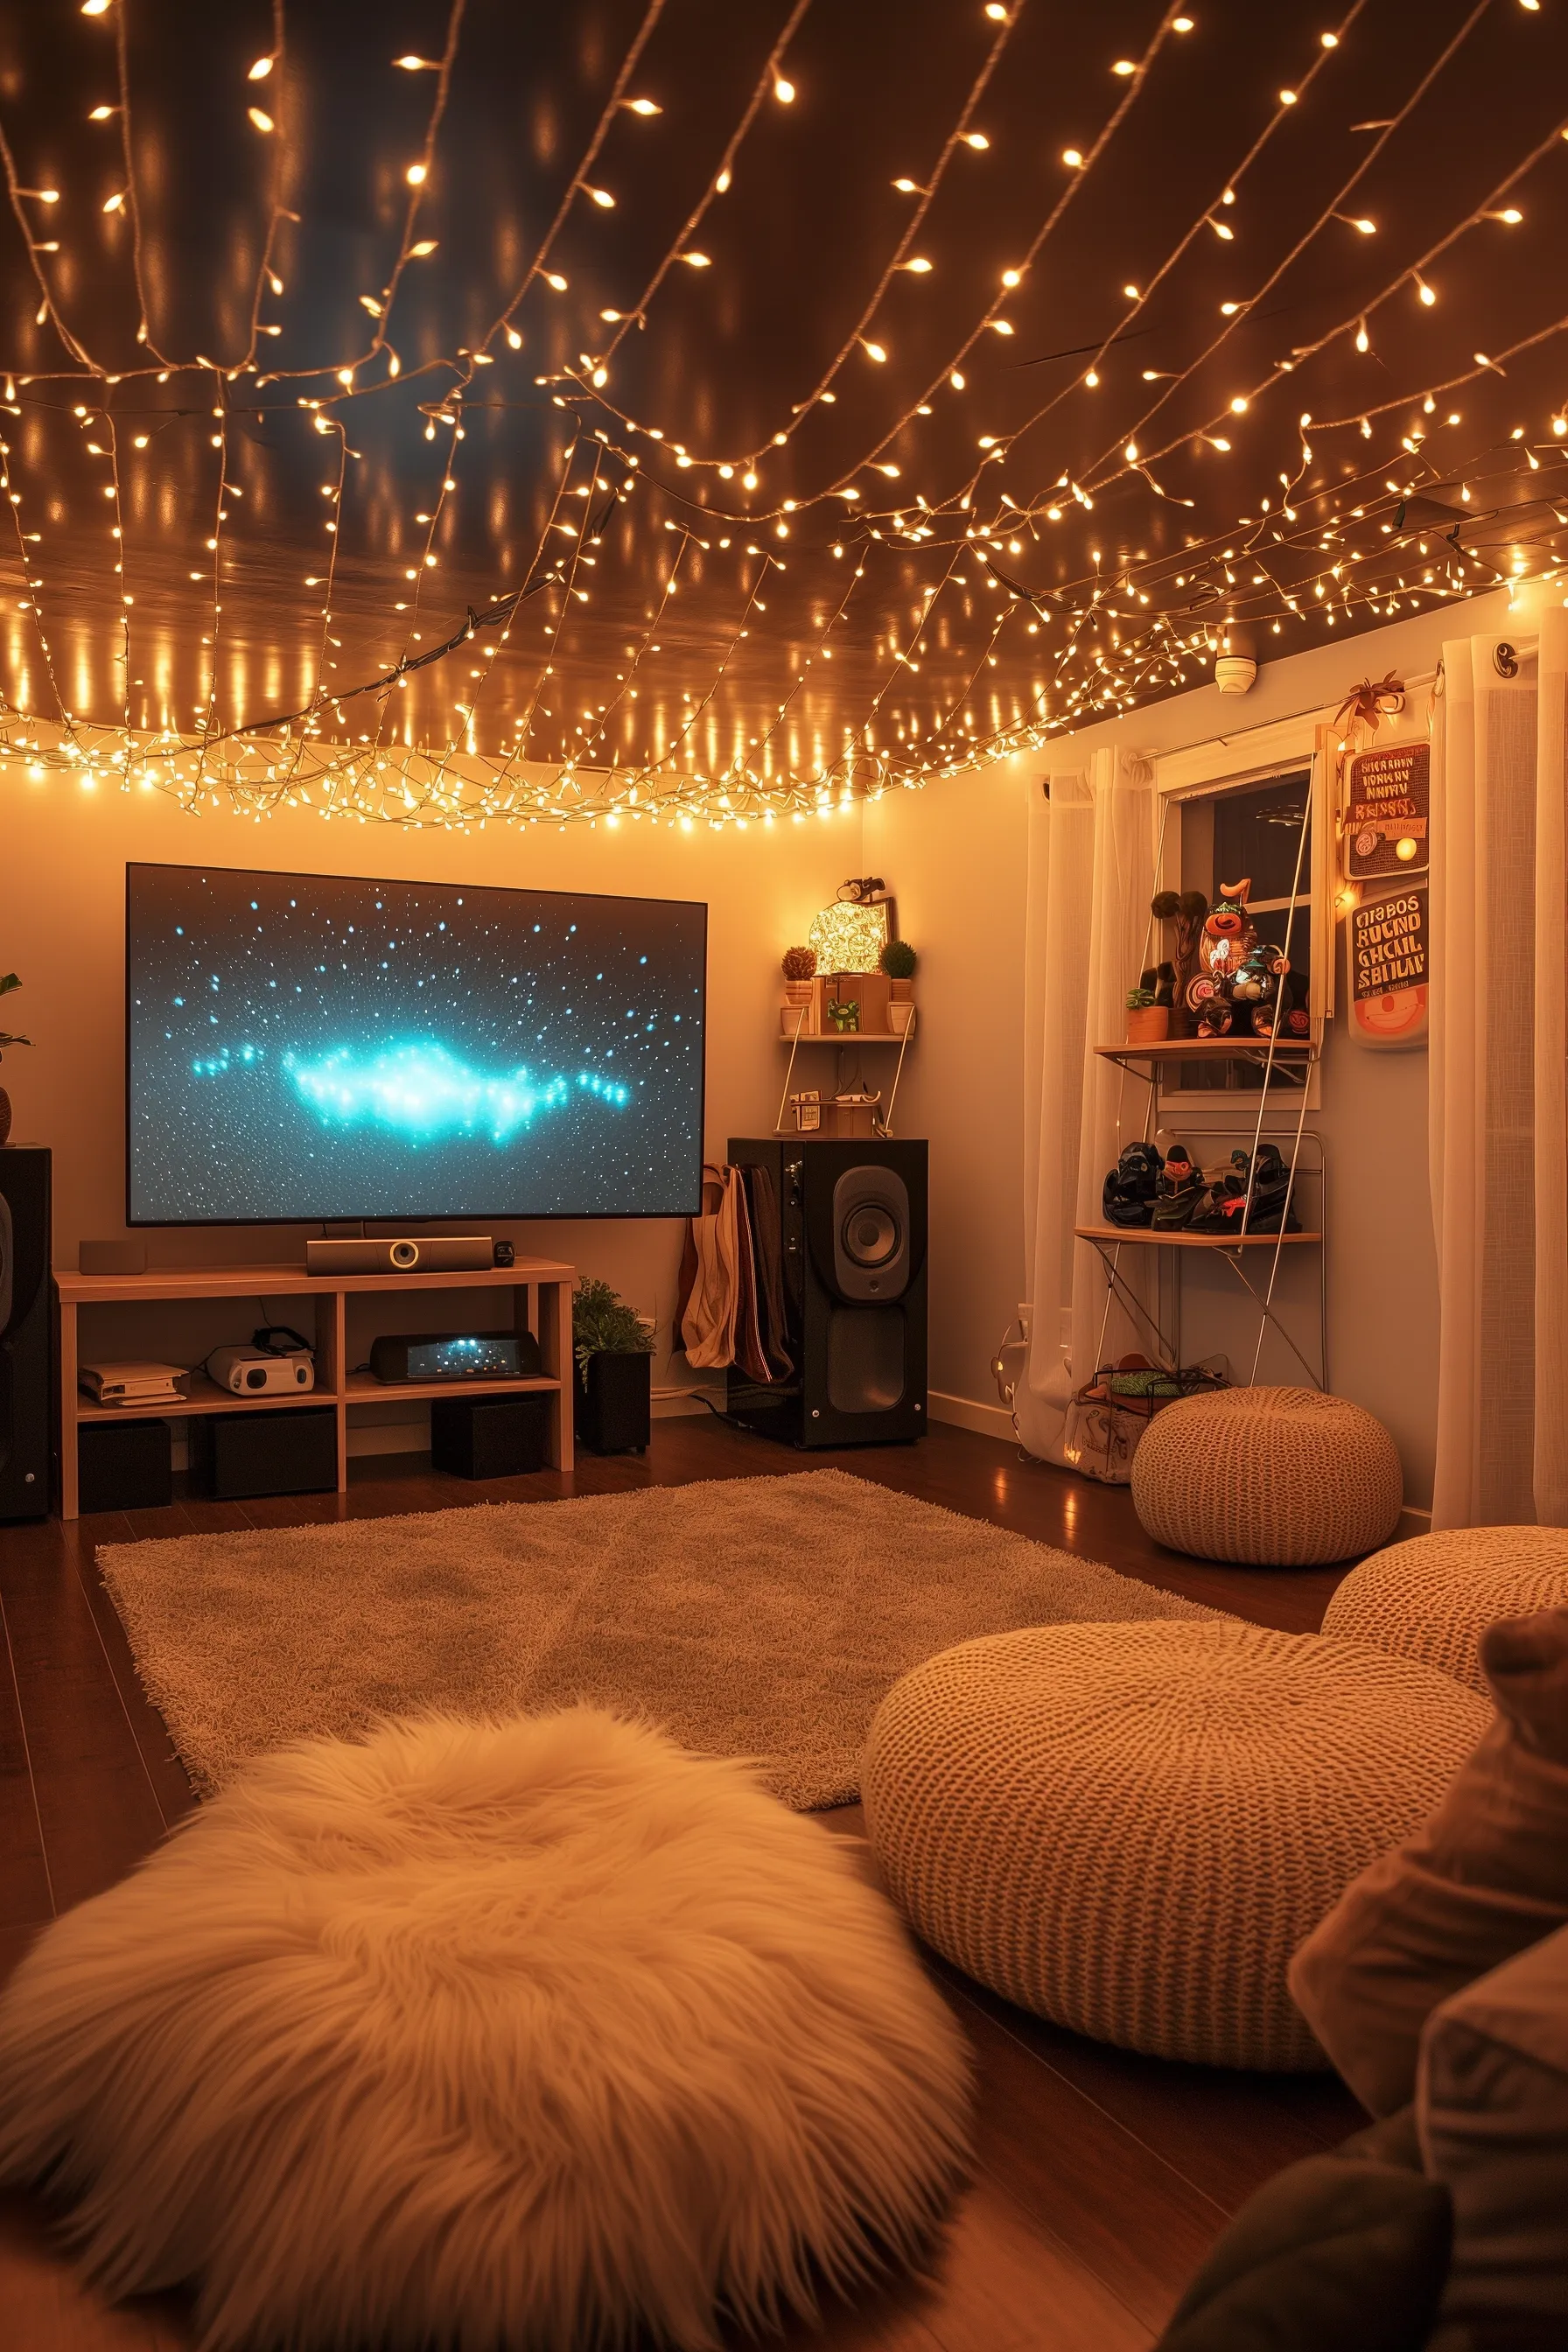 A game room with fairy lights